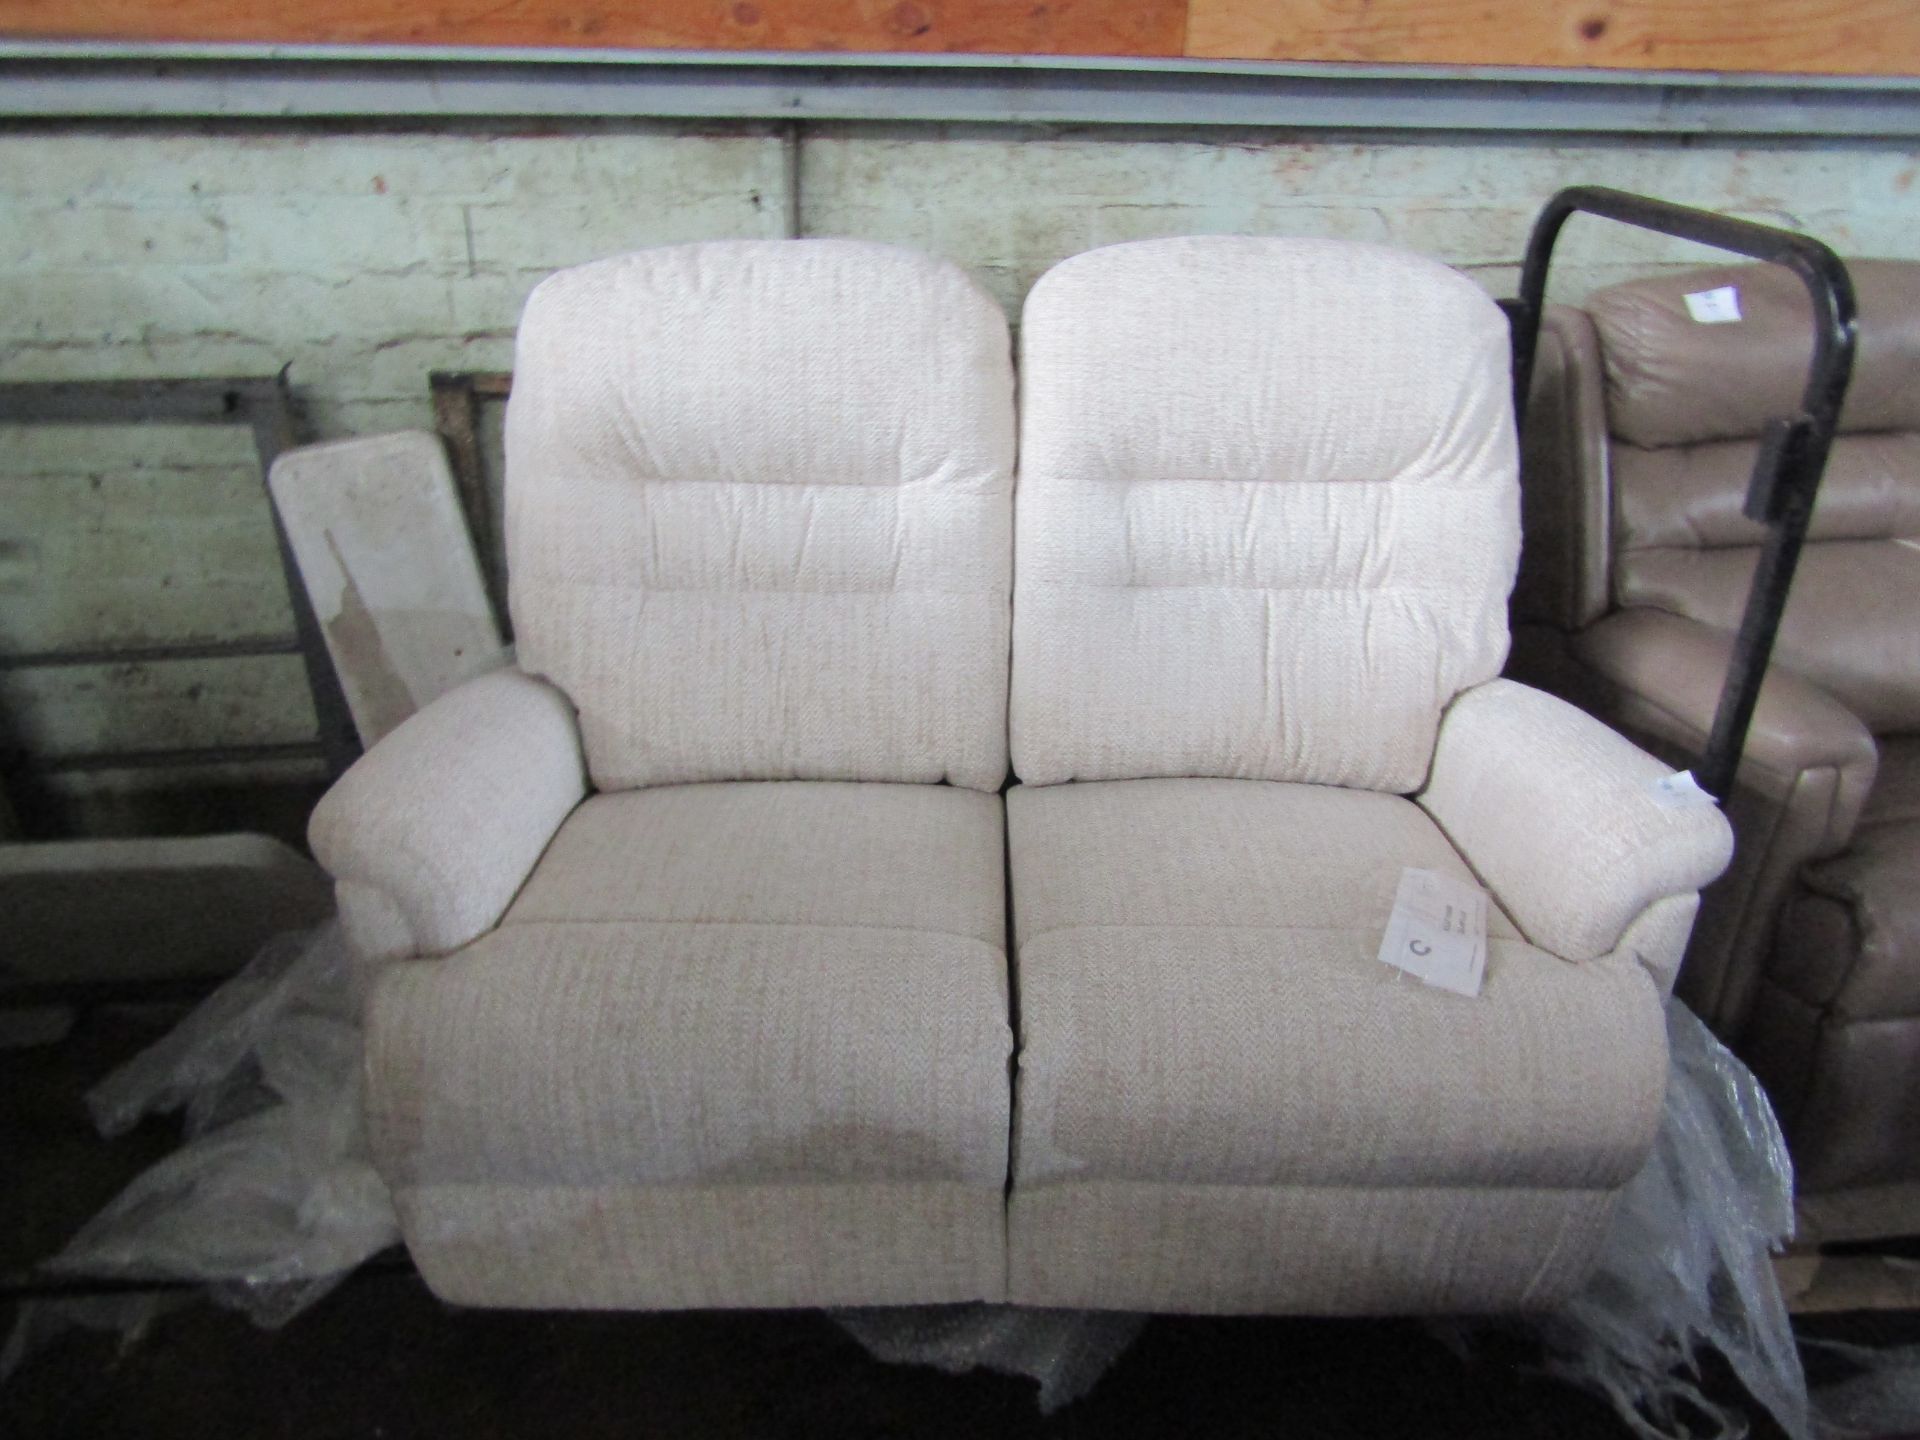 HSL Penrith Super Petite 2 Seater Catch Sofa Canillo Ivory RRP ?1360.00HSL-AP This product has